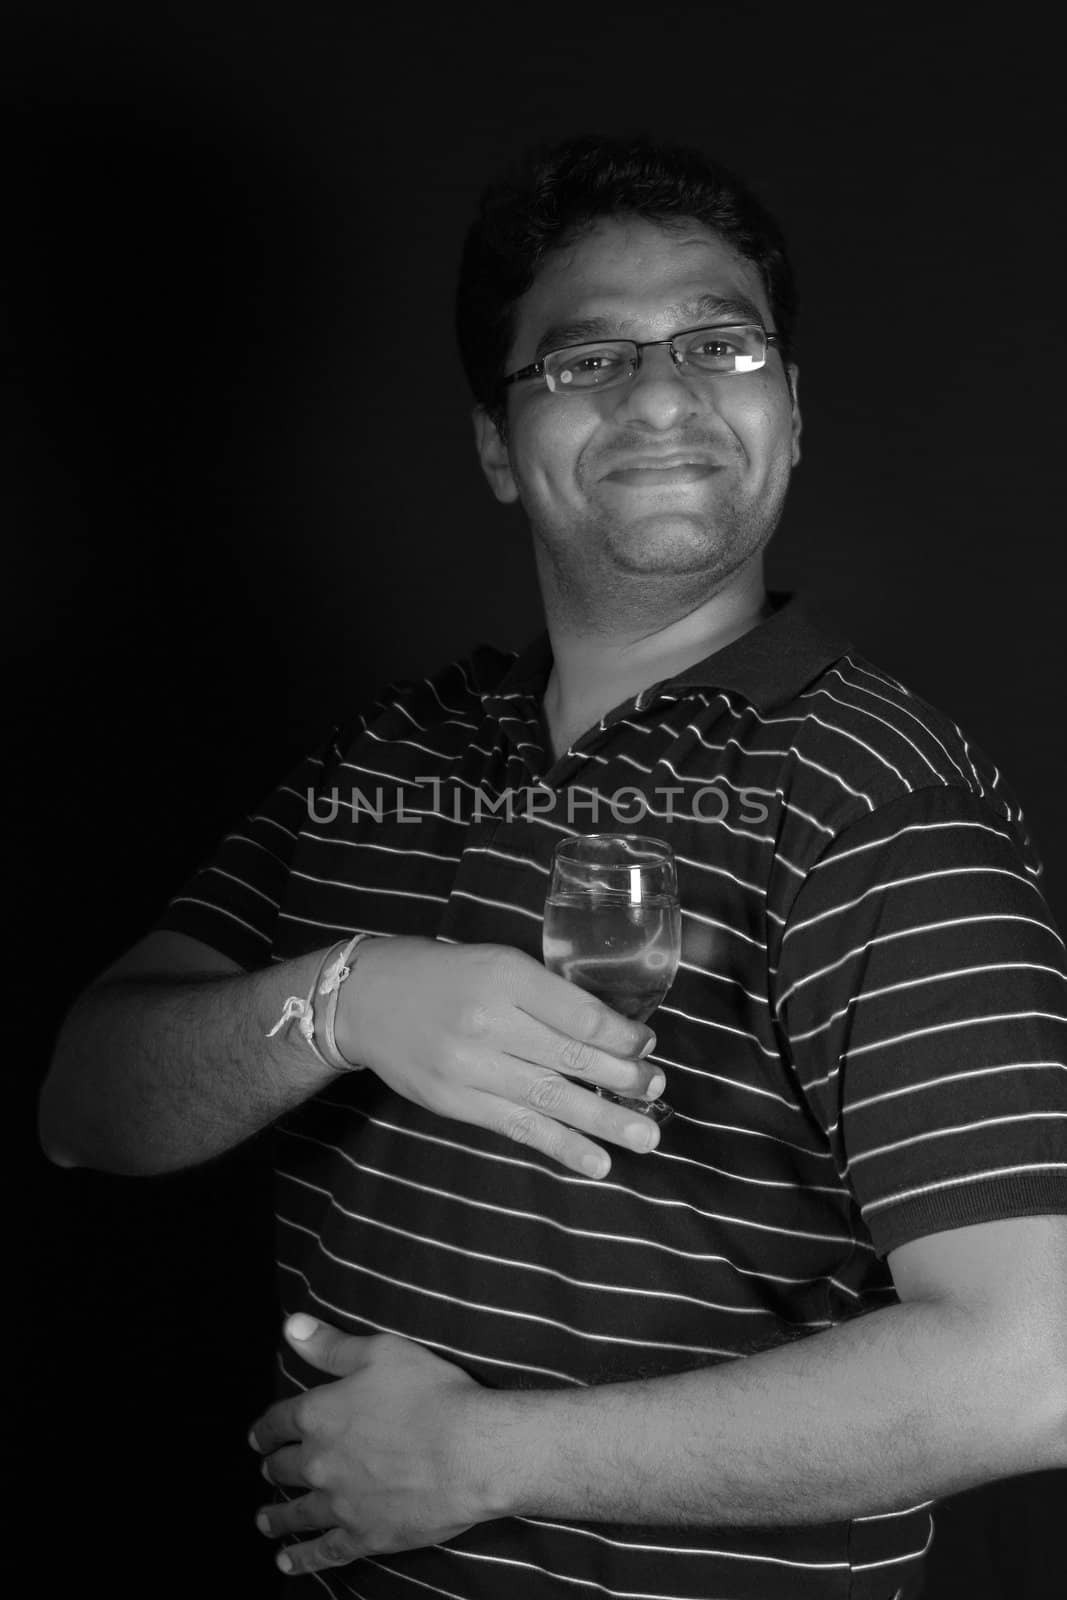 A portrait of a funny Indian actor holding a wineglass.